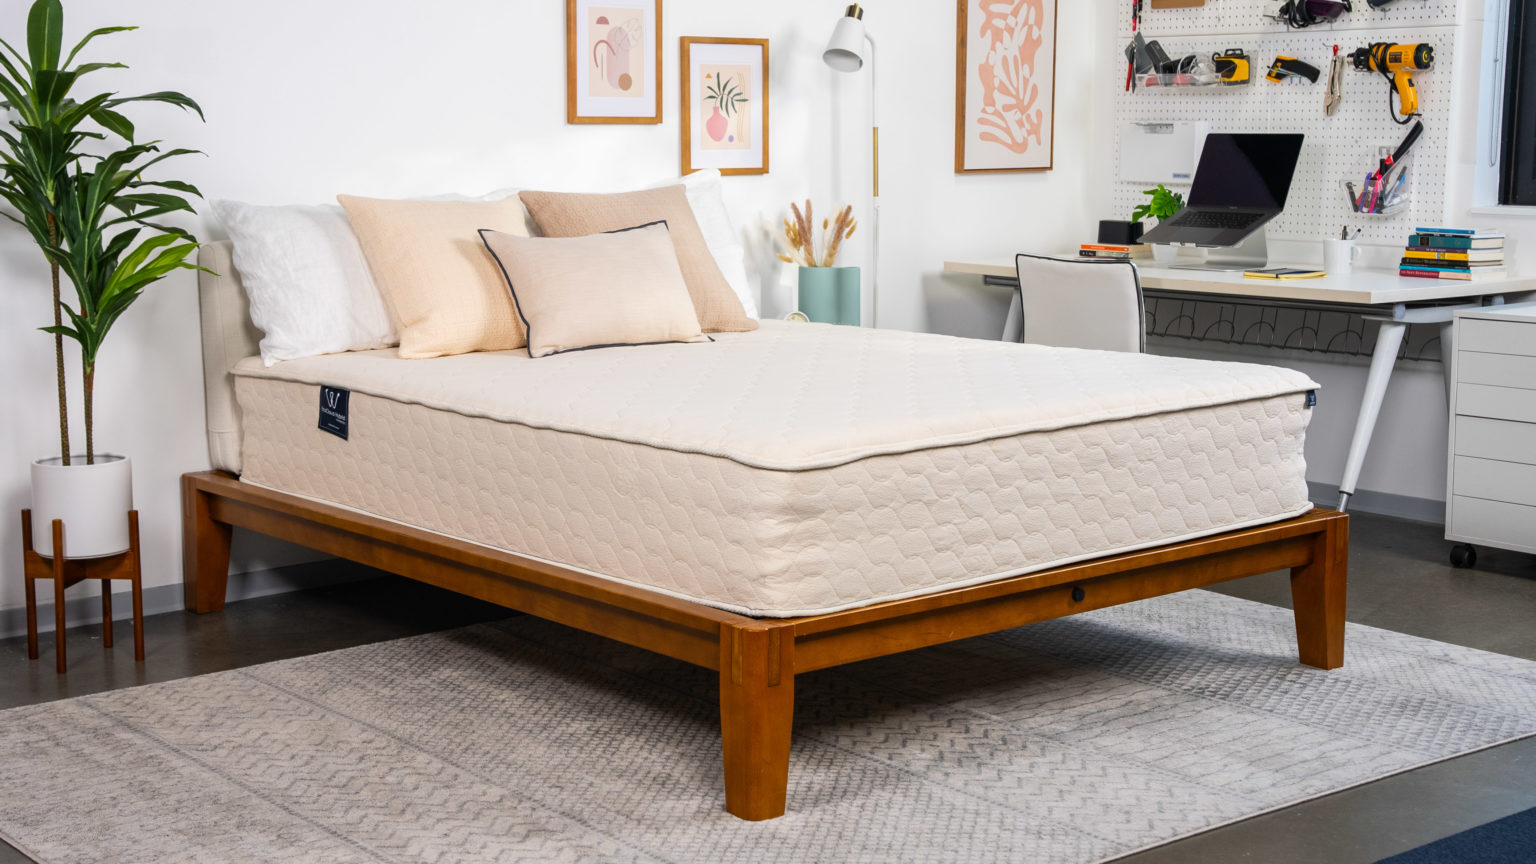 The Ultimate Guide to Choosing the Perfect Mattress for Your Best Sleep